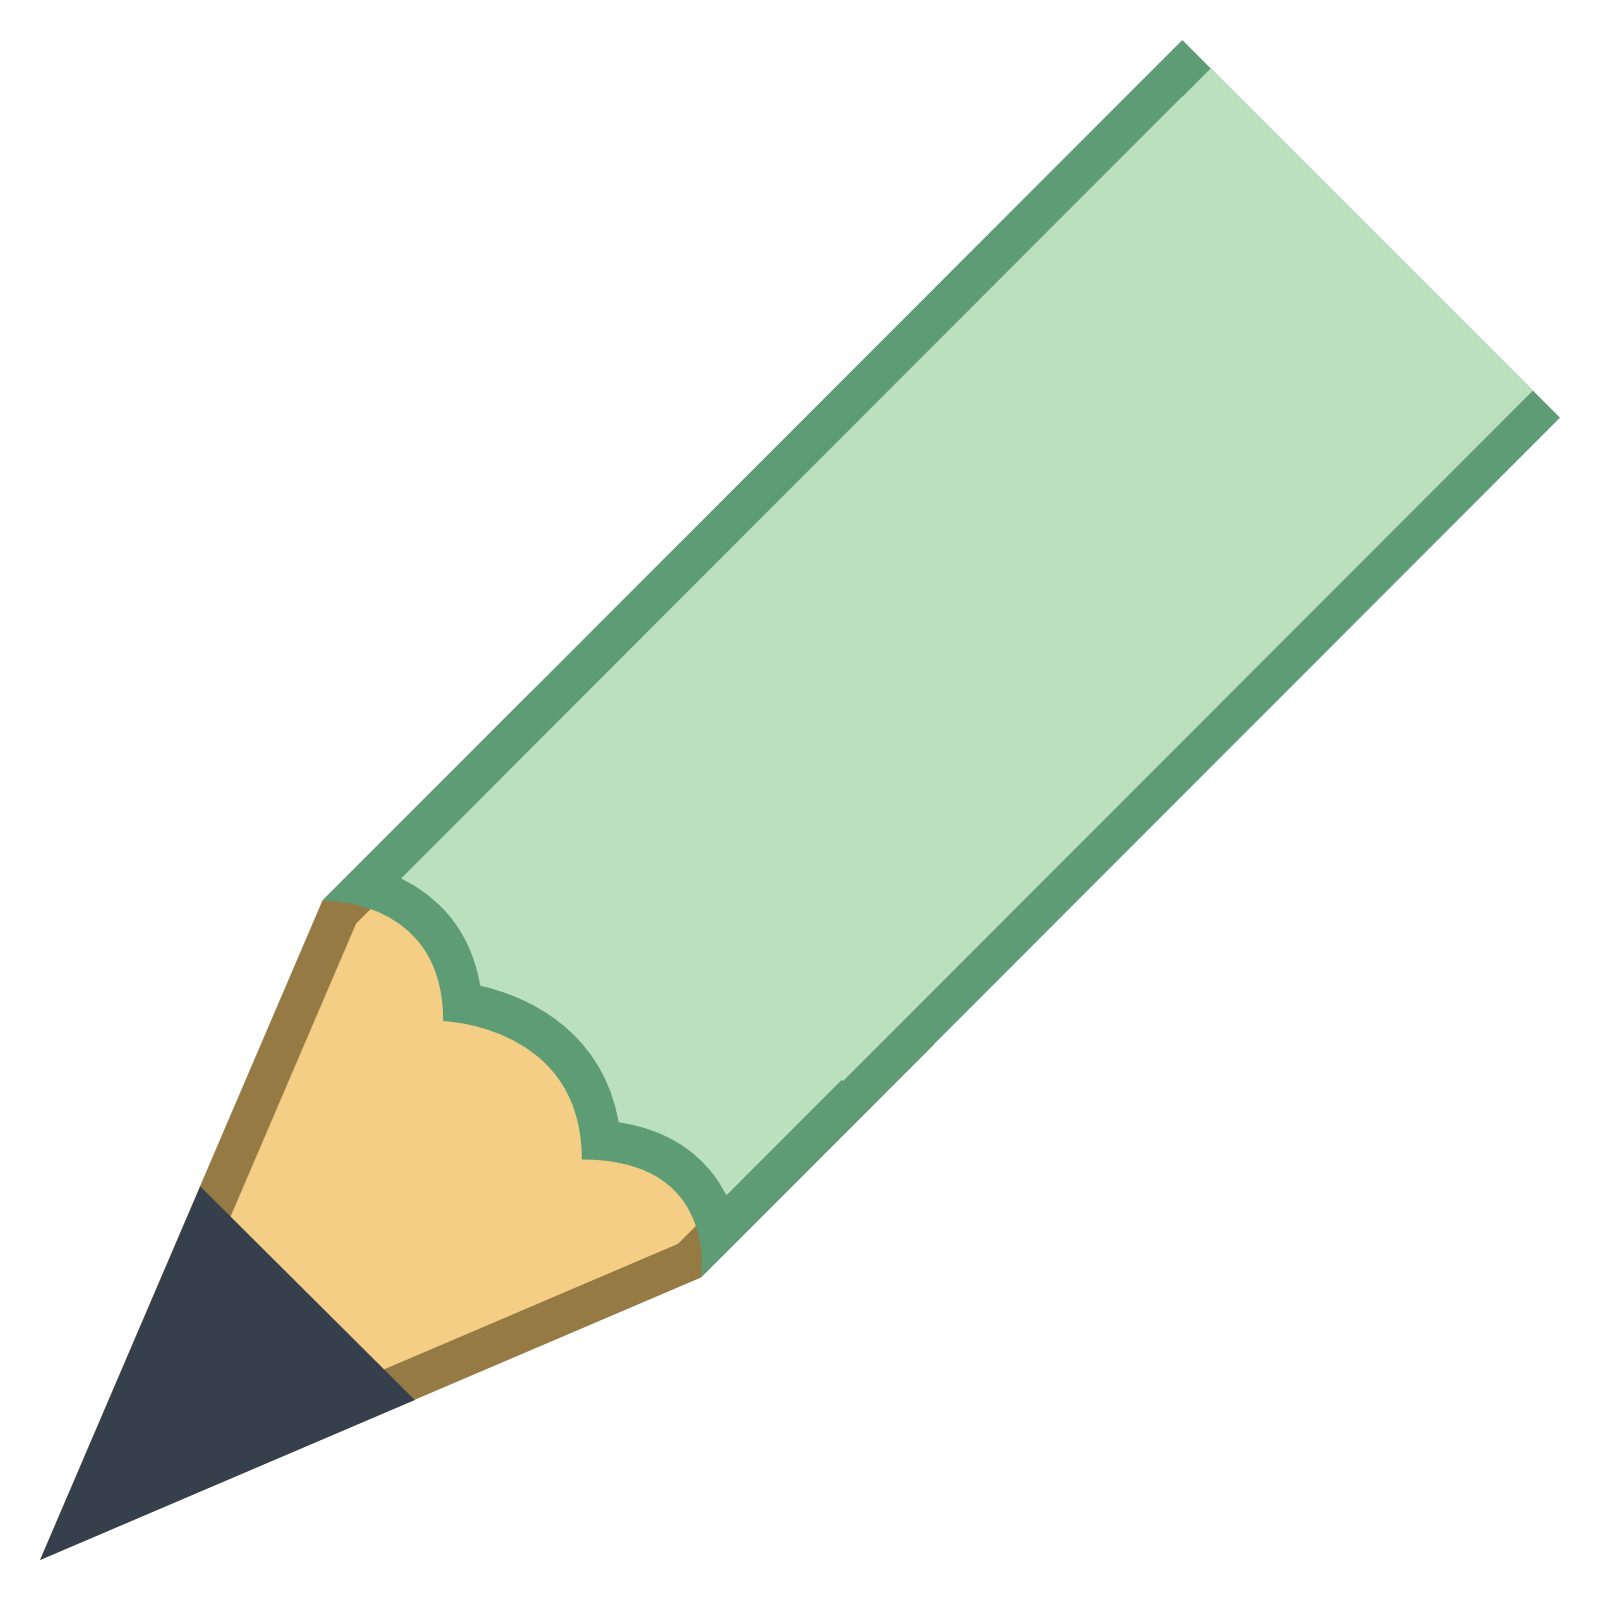 Tip Of Pencil Png - Pencil Tip Icon, Transparent background PNG HD thumbnail